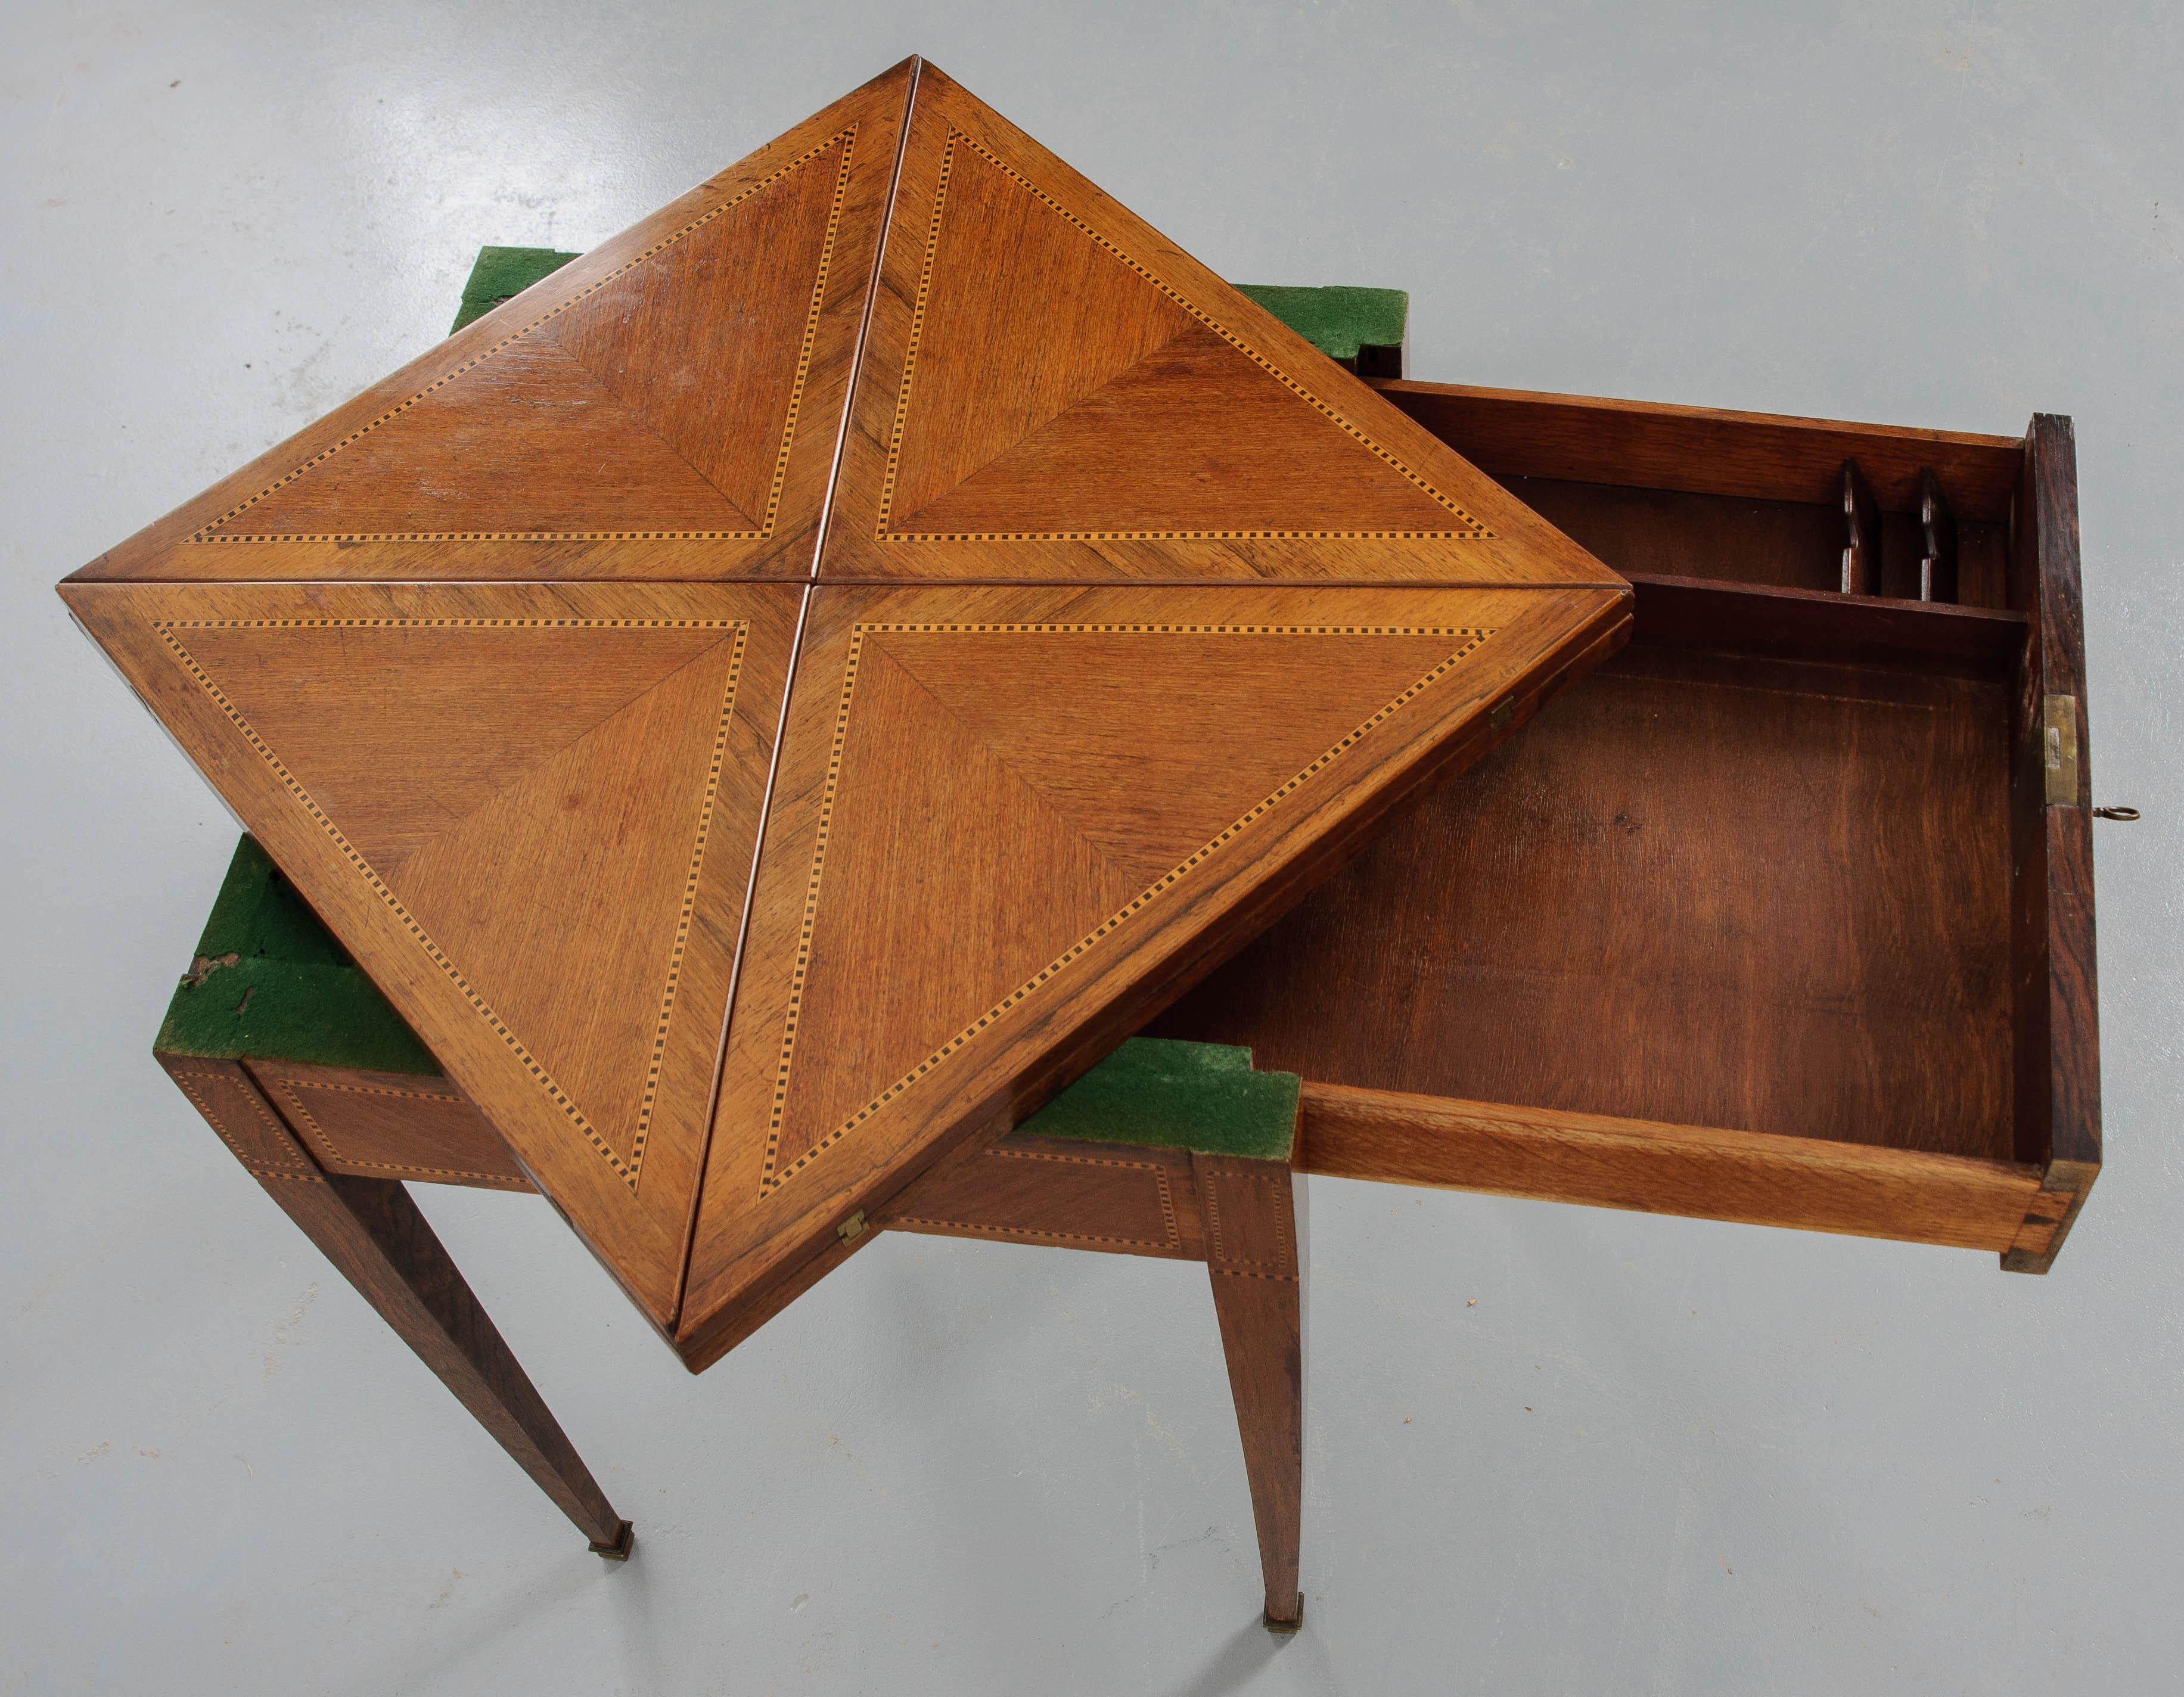 The mixed wood of mahogany, rosewood, satinwood and ebony wood envelope game table has 4 folding panels that extend the table from 21-?” W to 30-?” W. Just twist the table top to get one of the center corners to pop up and fold out the four panels.